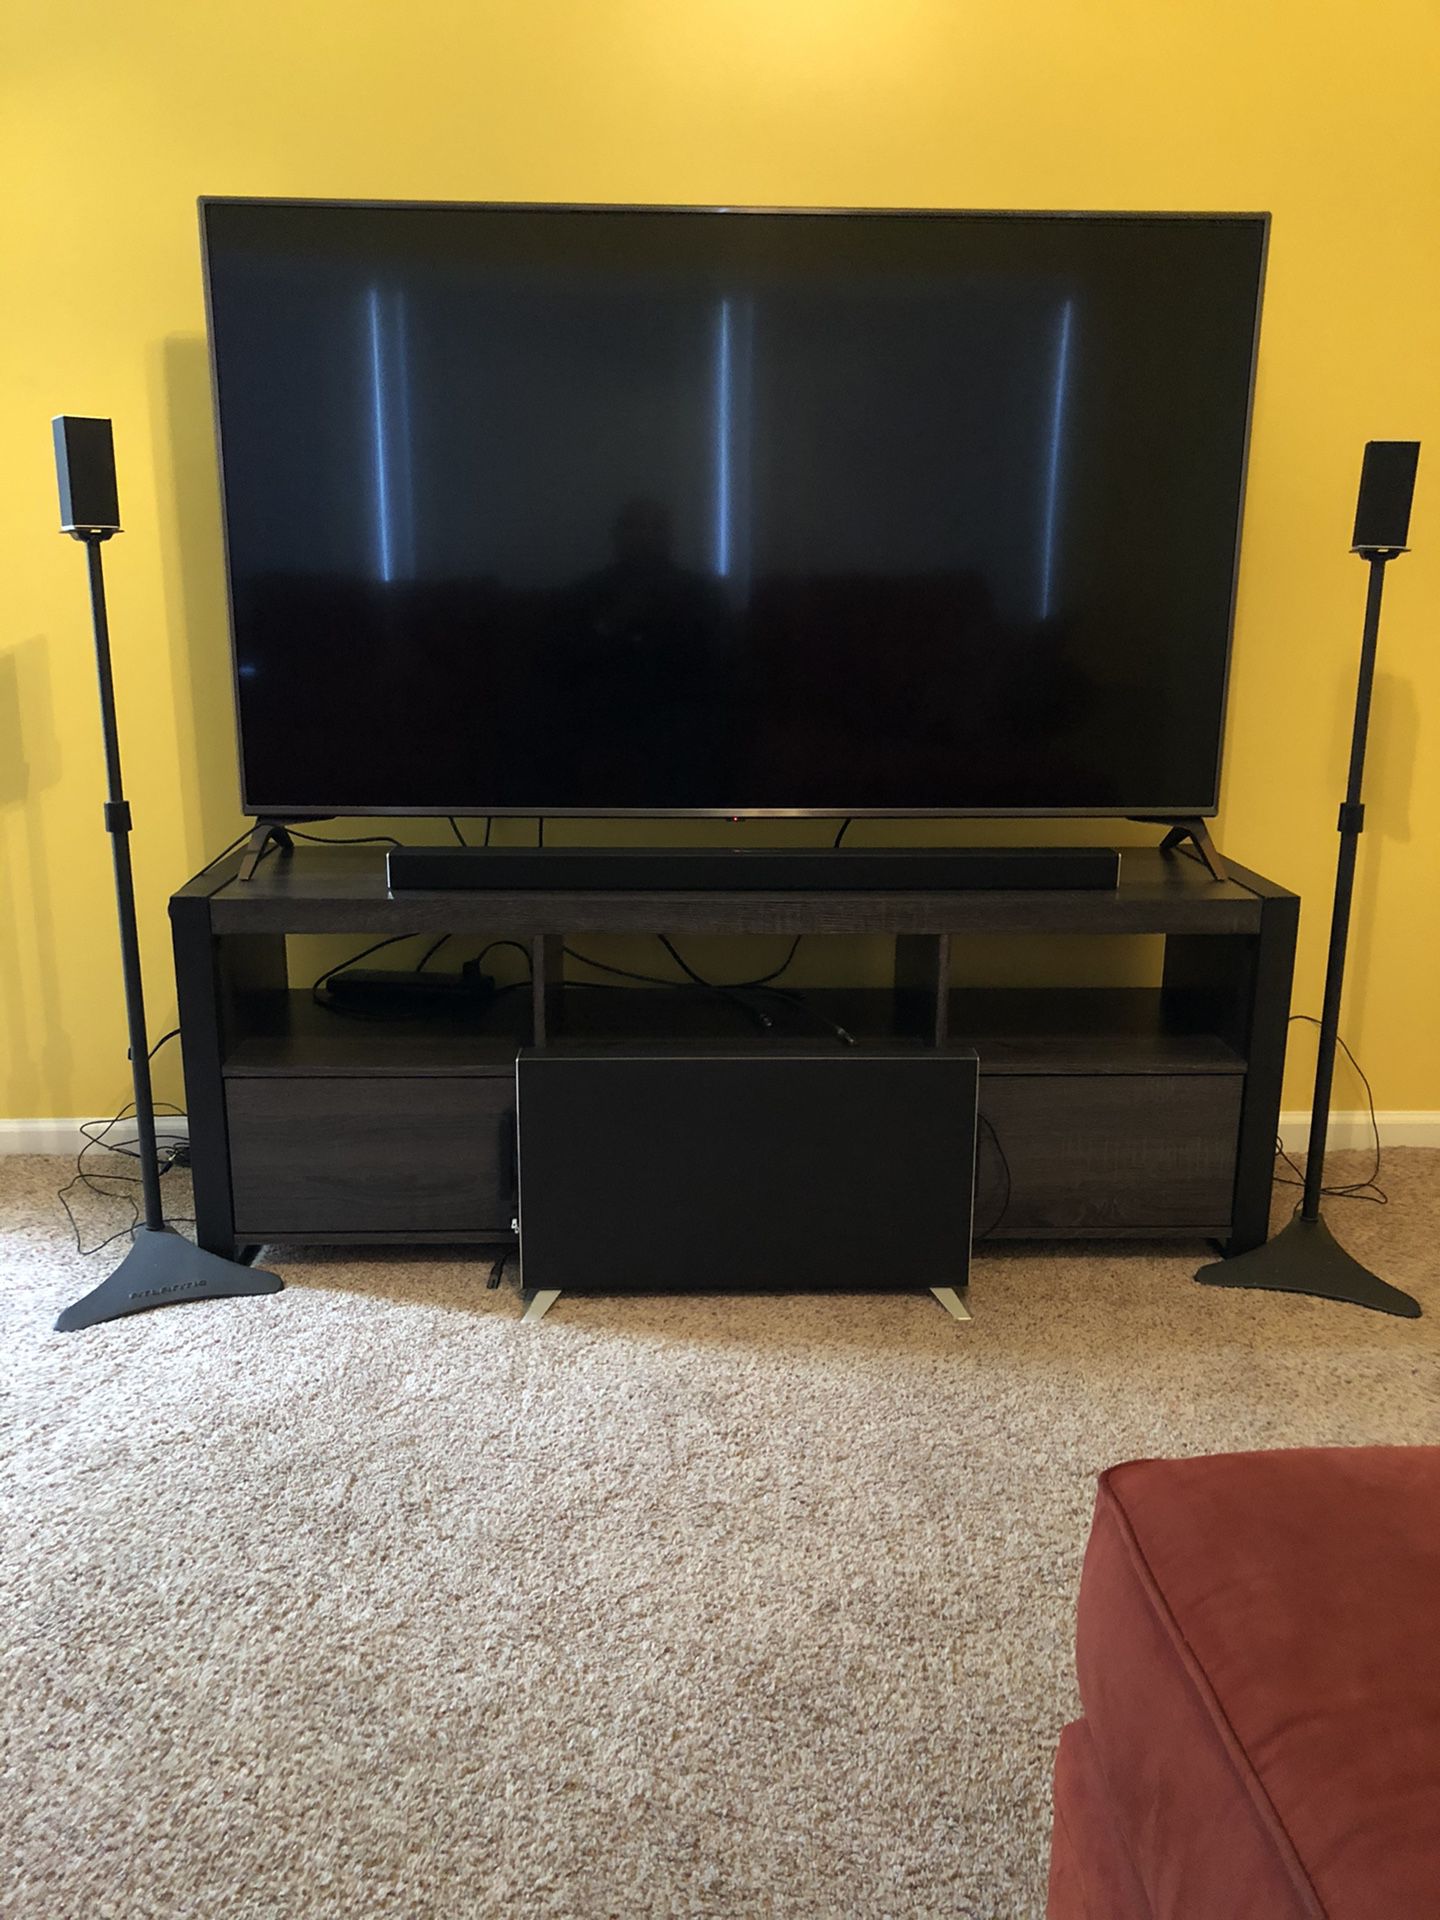 Vizio 5.1 Surround Sound Bar System w/Speaker Stands - Does not include TV!